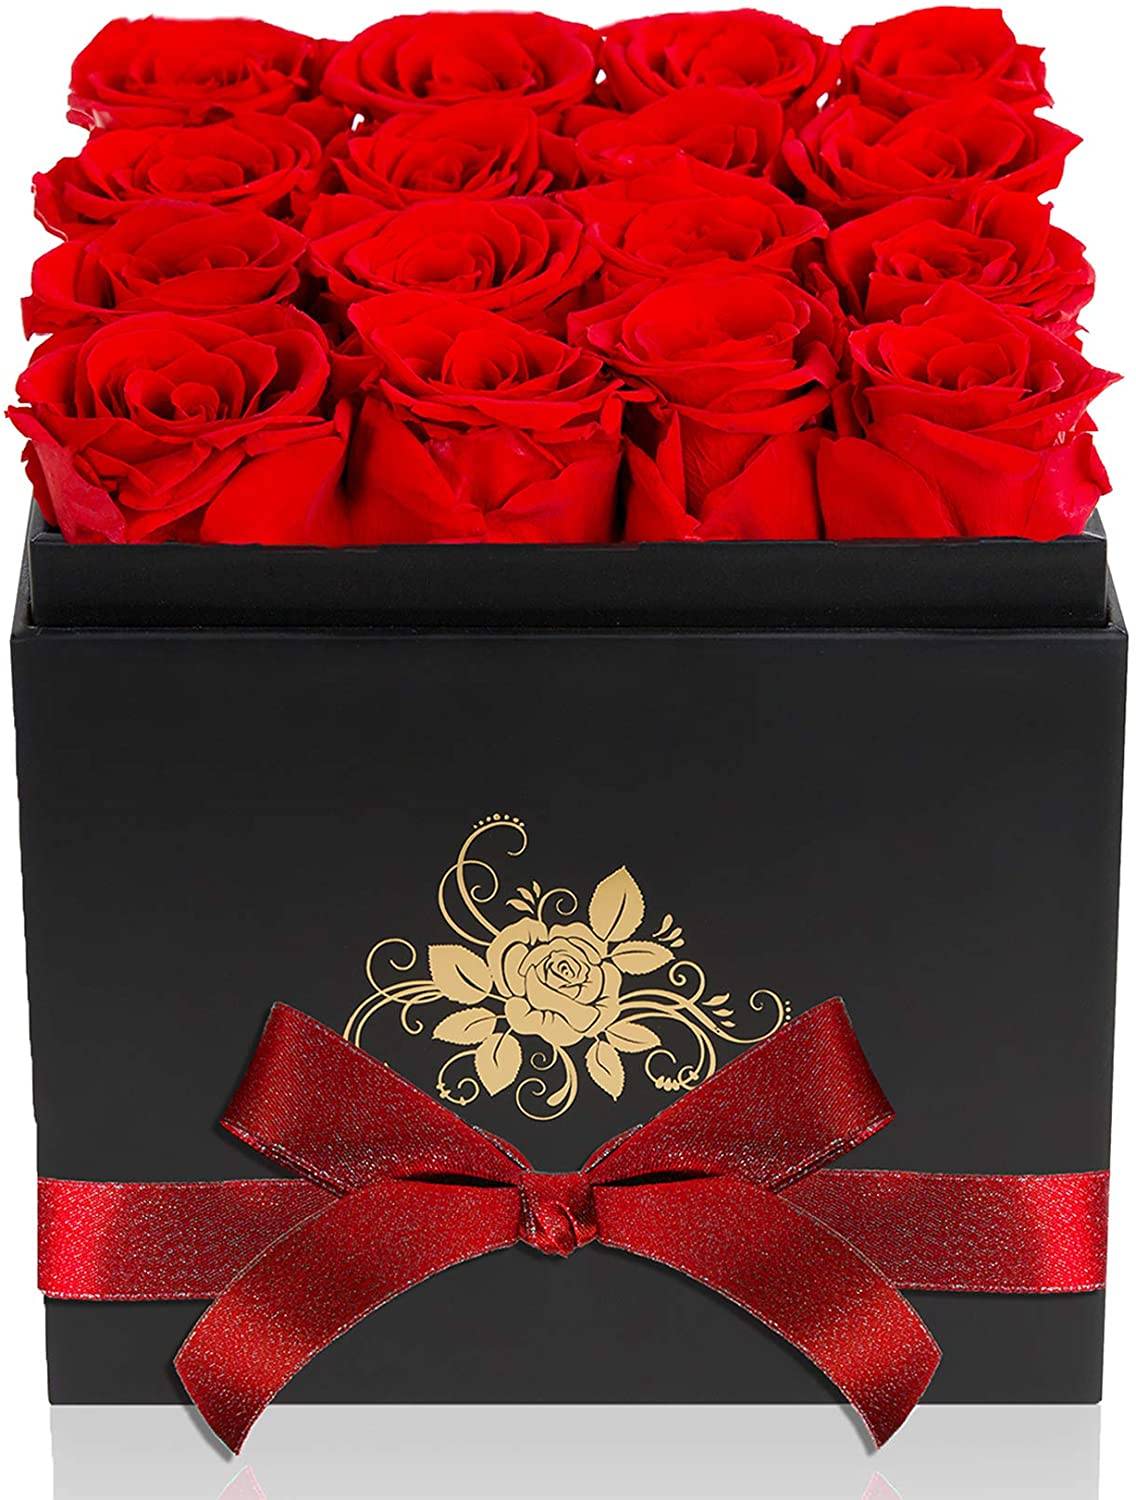 Long-lasting Red Roses Made of High-Quality Fresh Cut Roses with Unique Preservation Production Process for Valentine’s Day, Anniversary, Birthday, Mother’s Day, Thanksgiving, Christmas, Weddings, and Graduation.